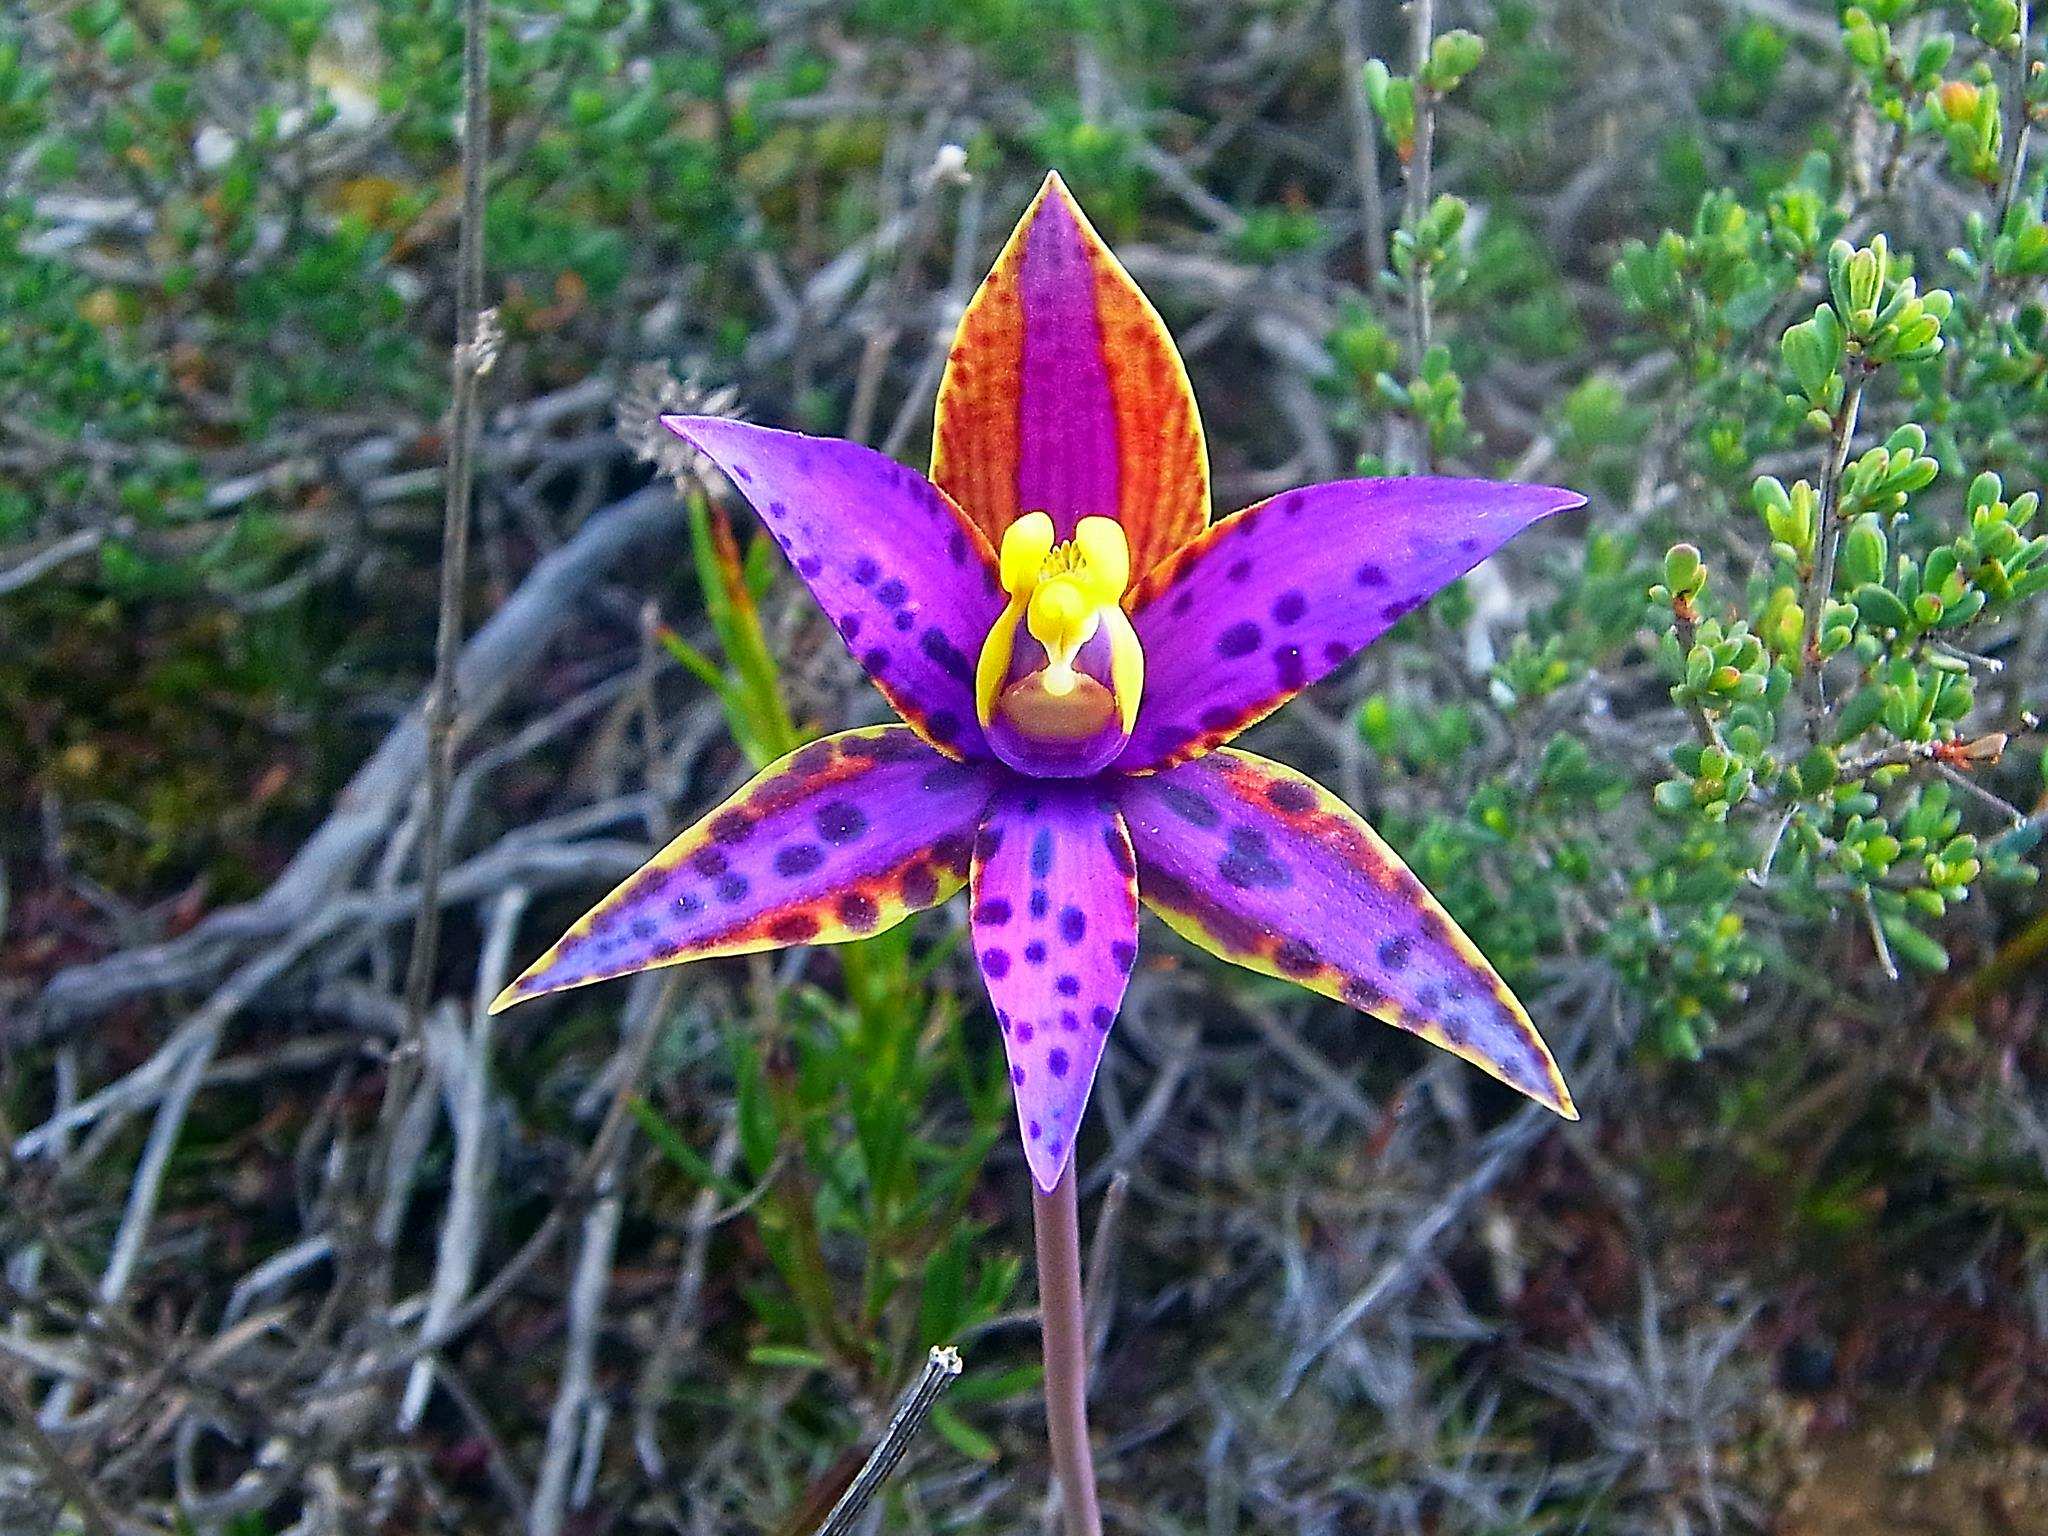 An image in close up of a bright purple orchid taken near Ongerup, Western Australia.